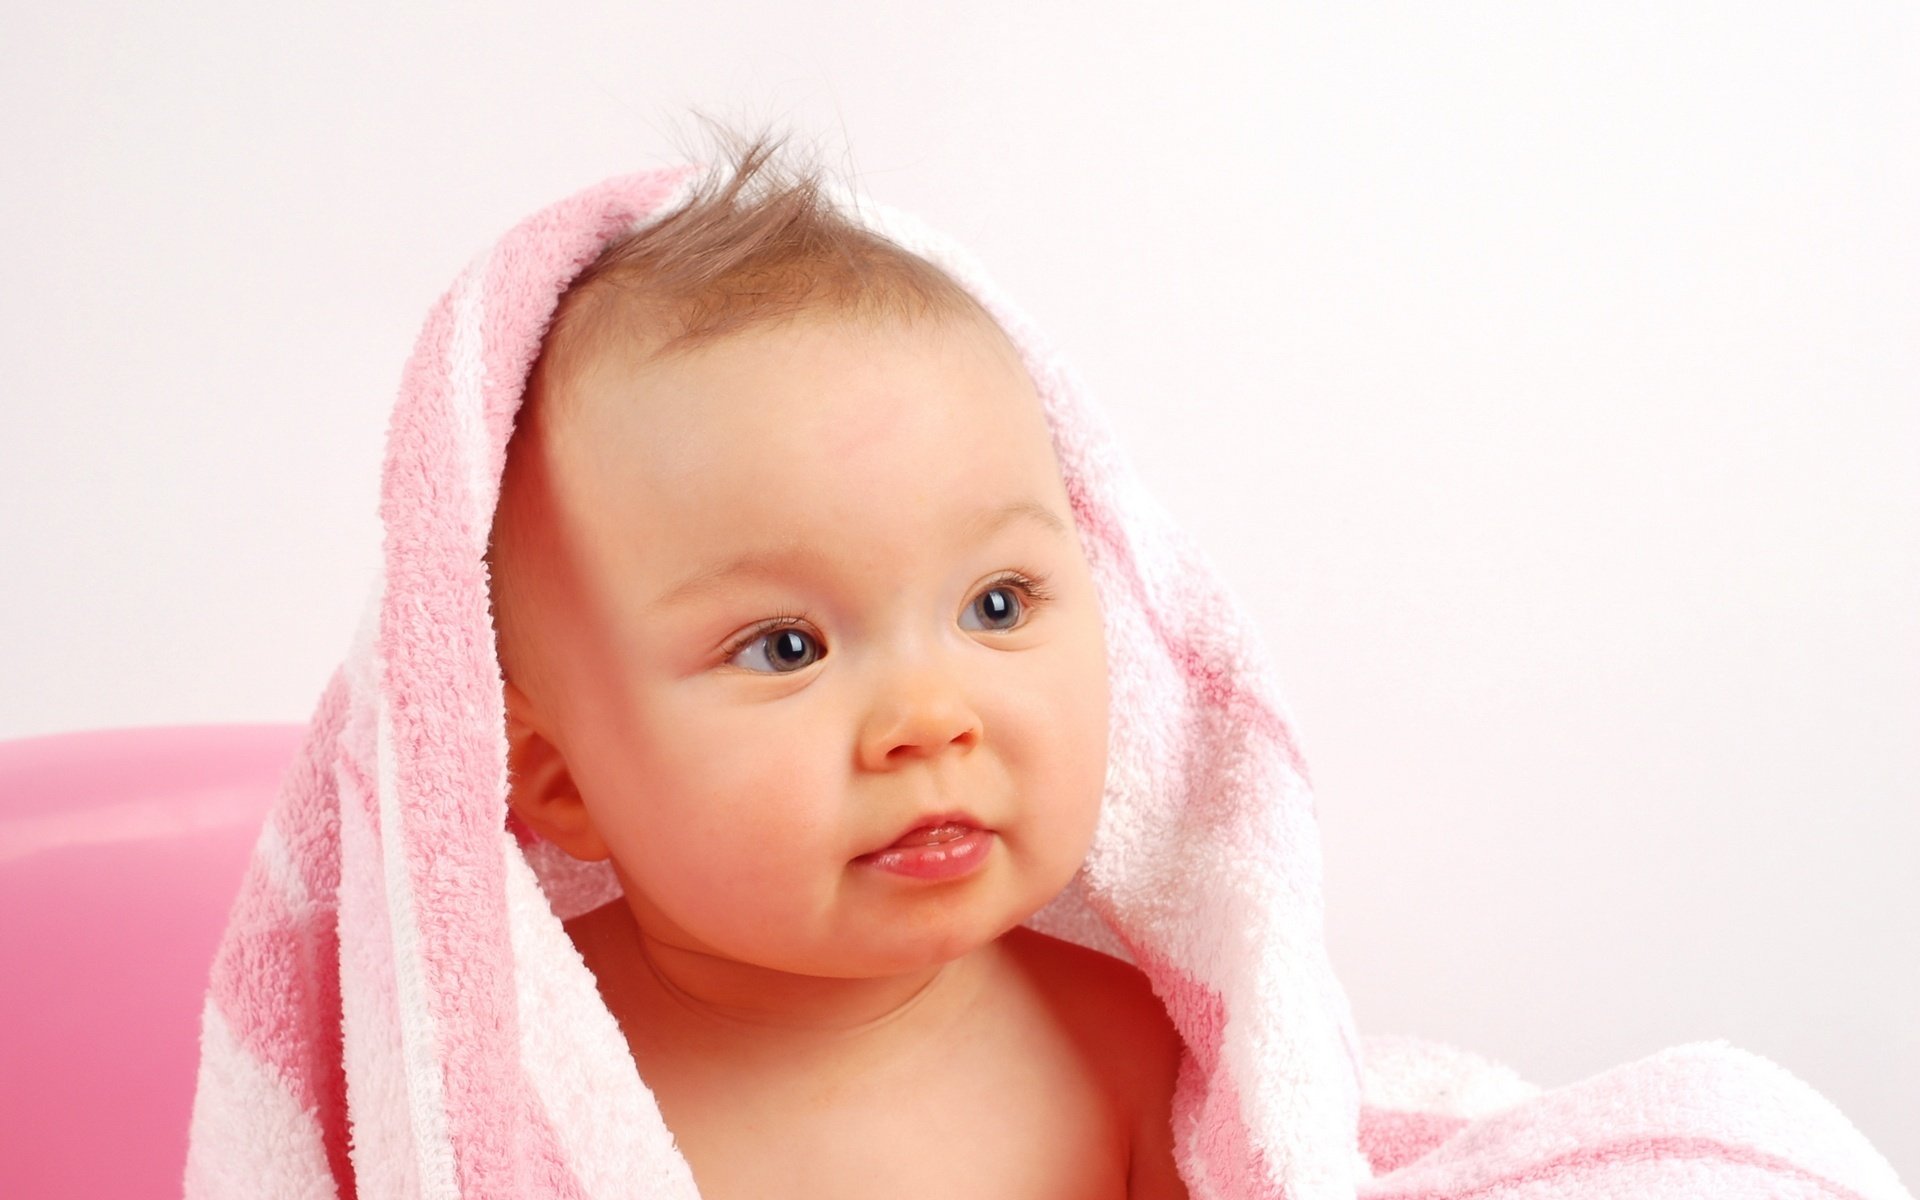 Baby in a towel baby portrait baby